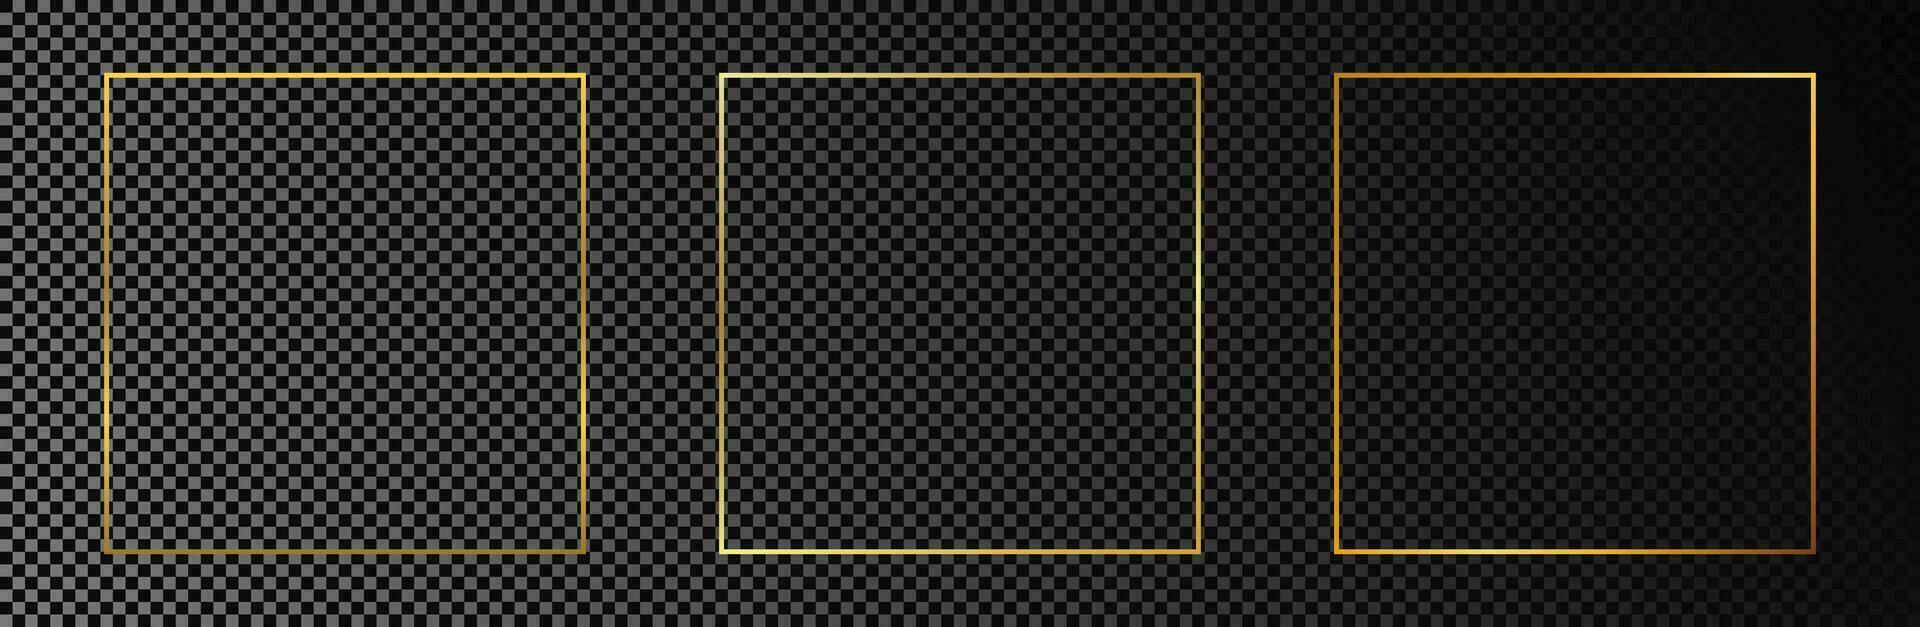 Gold glowing square frame vector